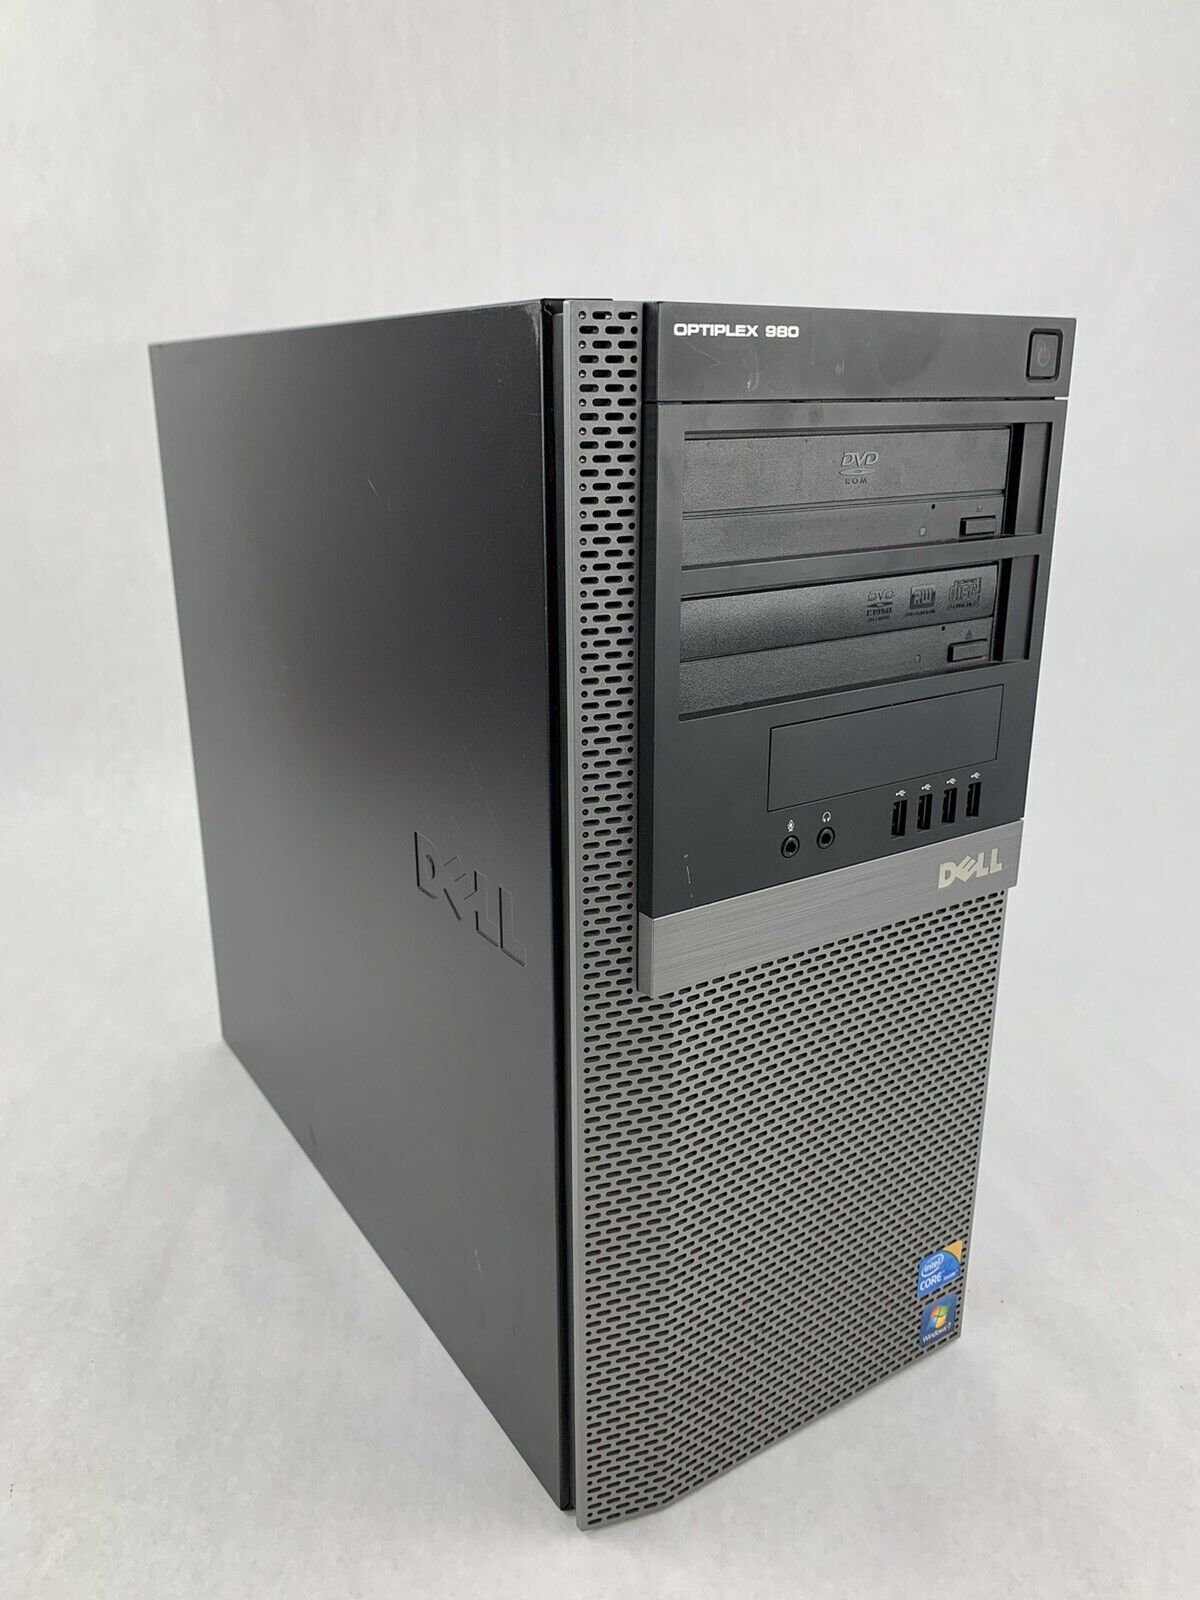 Dell  OPTIPLEX 980, i7-860, 2.8 GHz, 4G ram, TESTED No HDD or OS